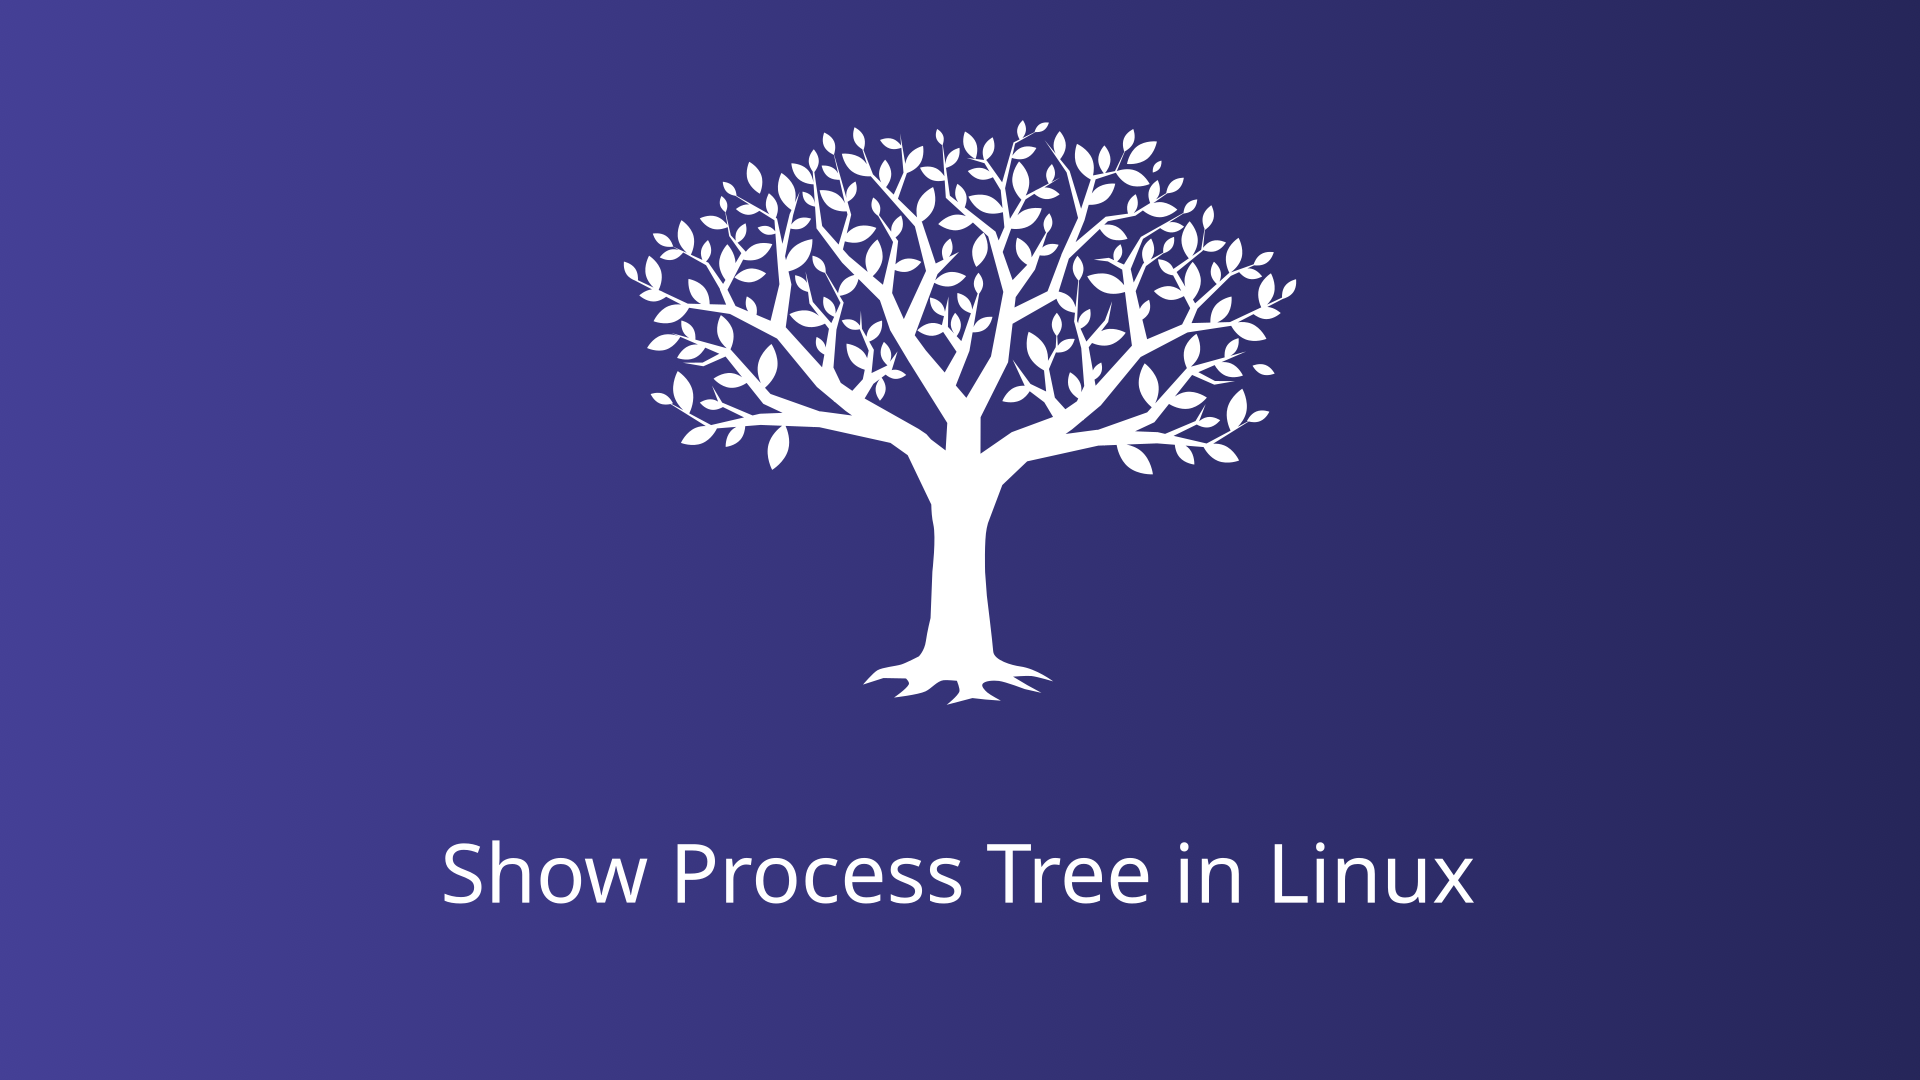 Show Process Tree in Linux